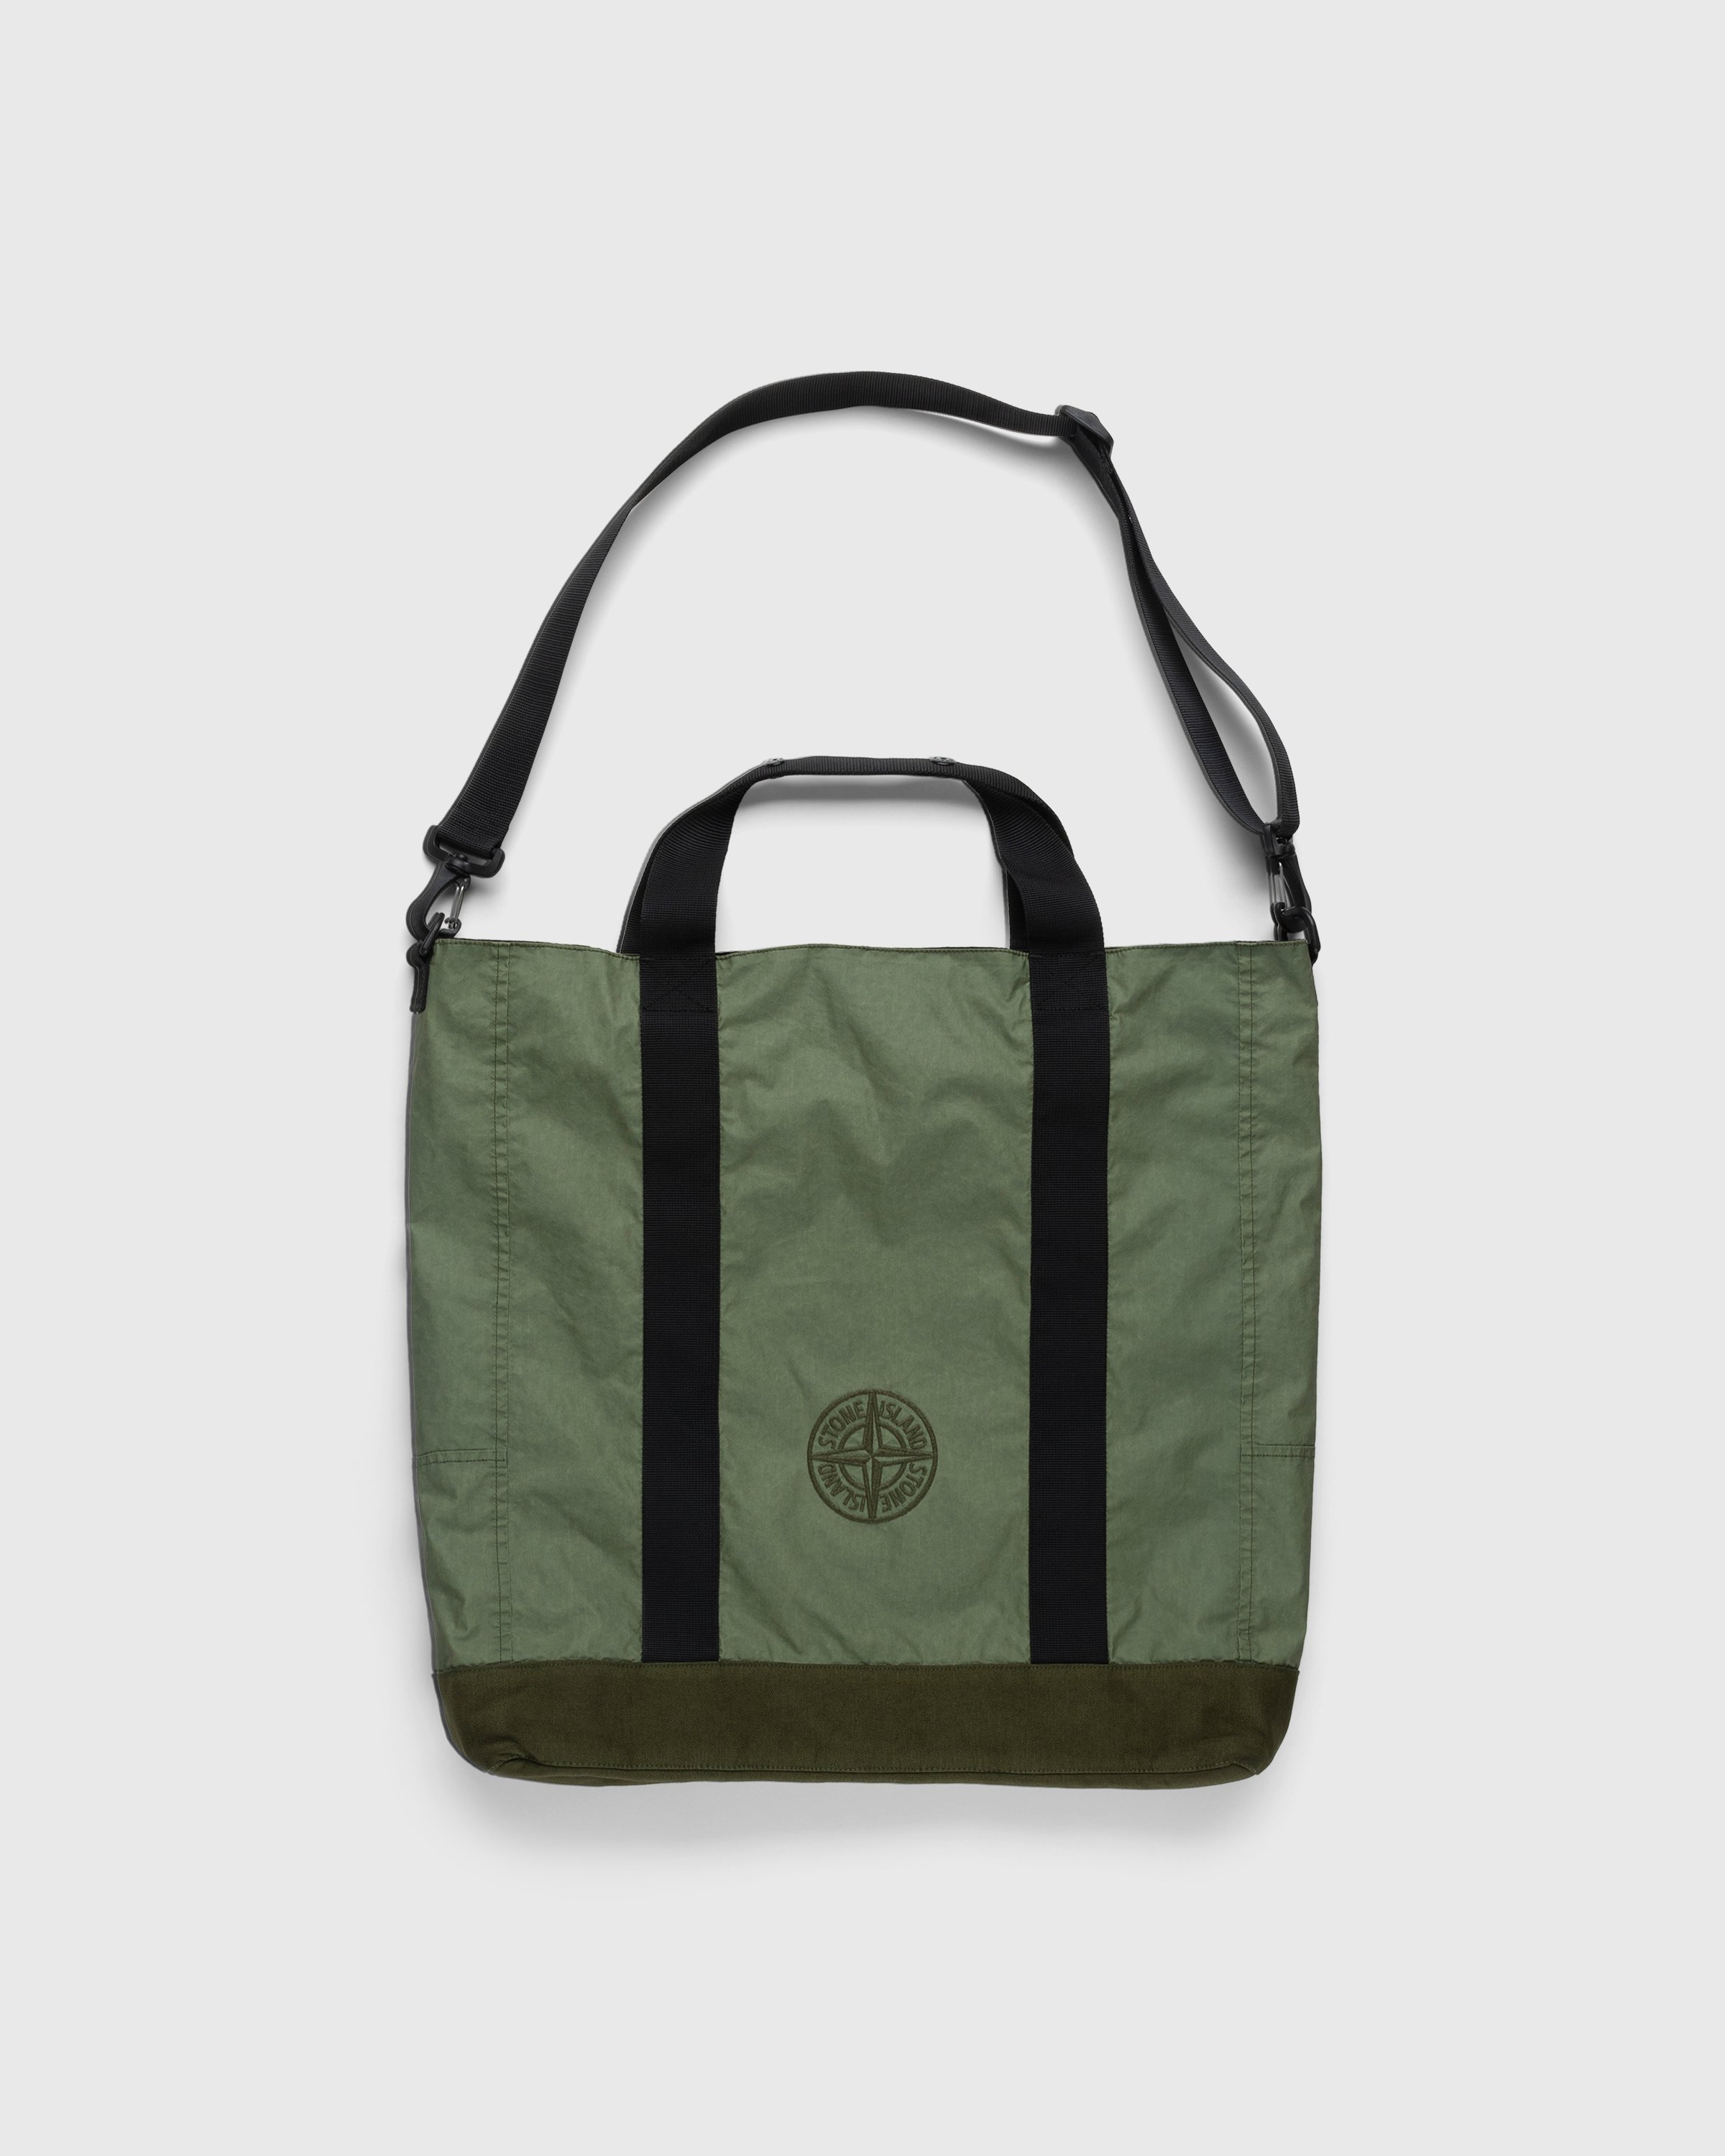 Stone Island - 91475 Garment-Dyed Tote Bag Olive - Accessories - Green - Image 1